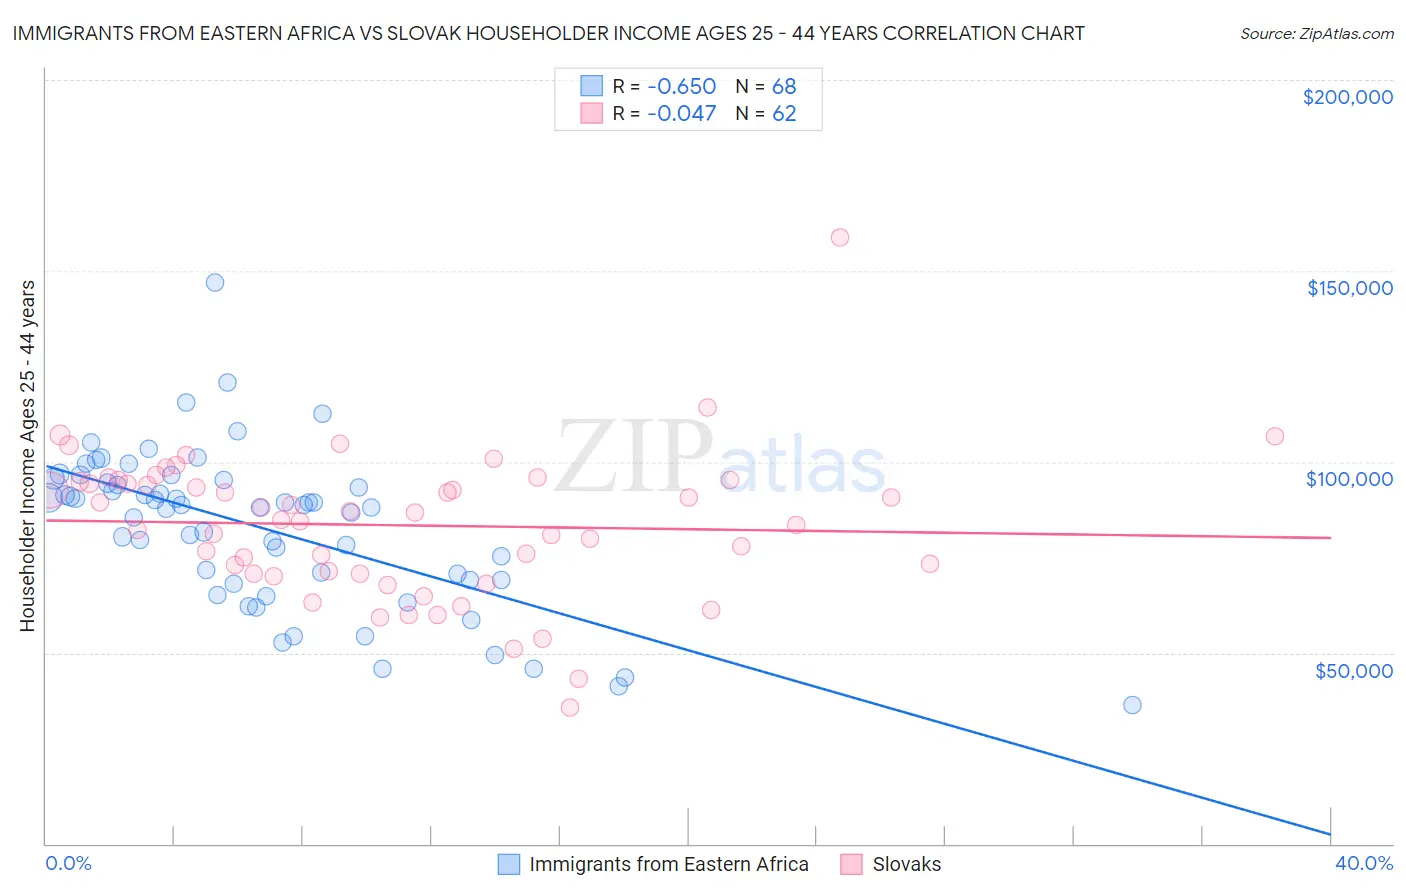 Immigrants from Eastern Africa vs Slovak Householder Income Ages 25 - 44 years